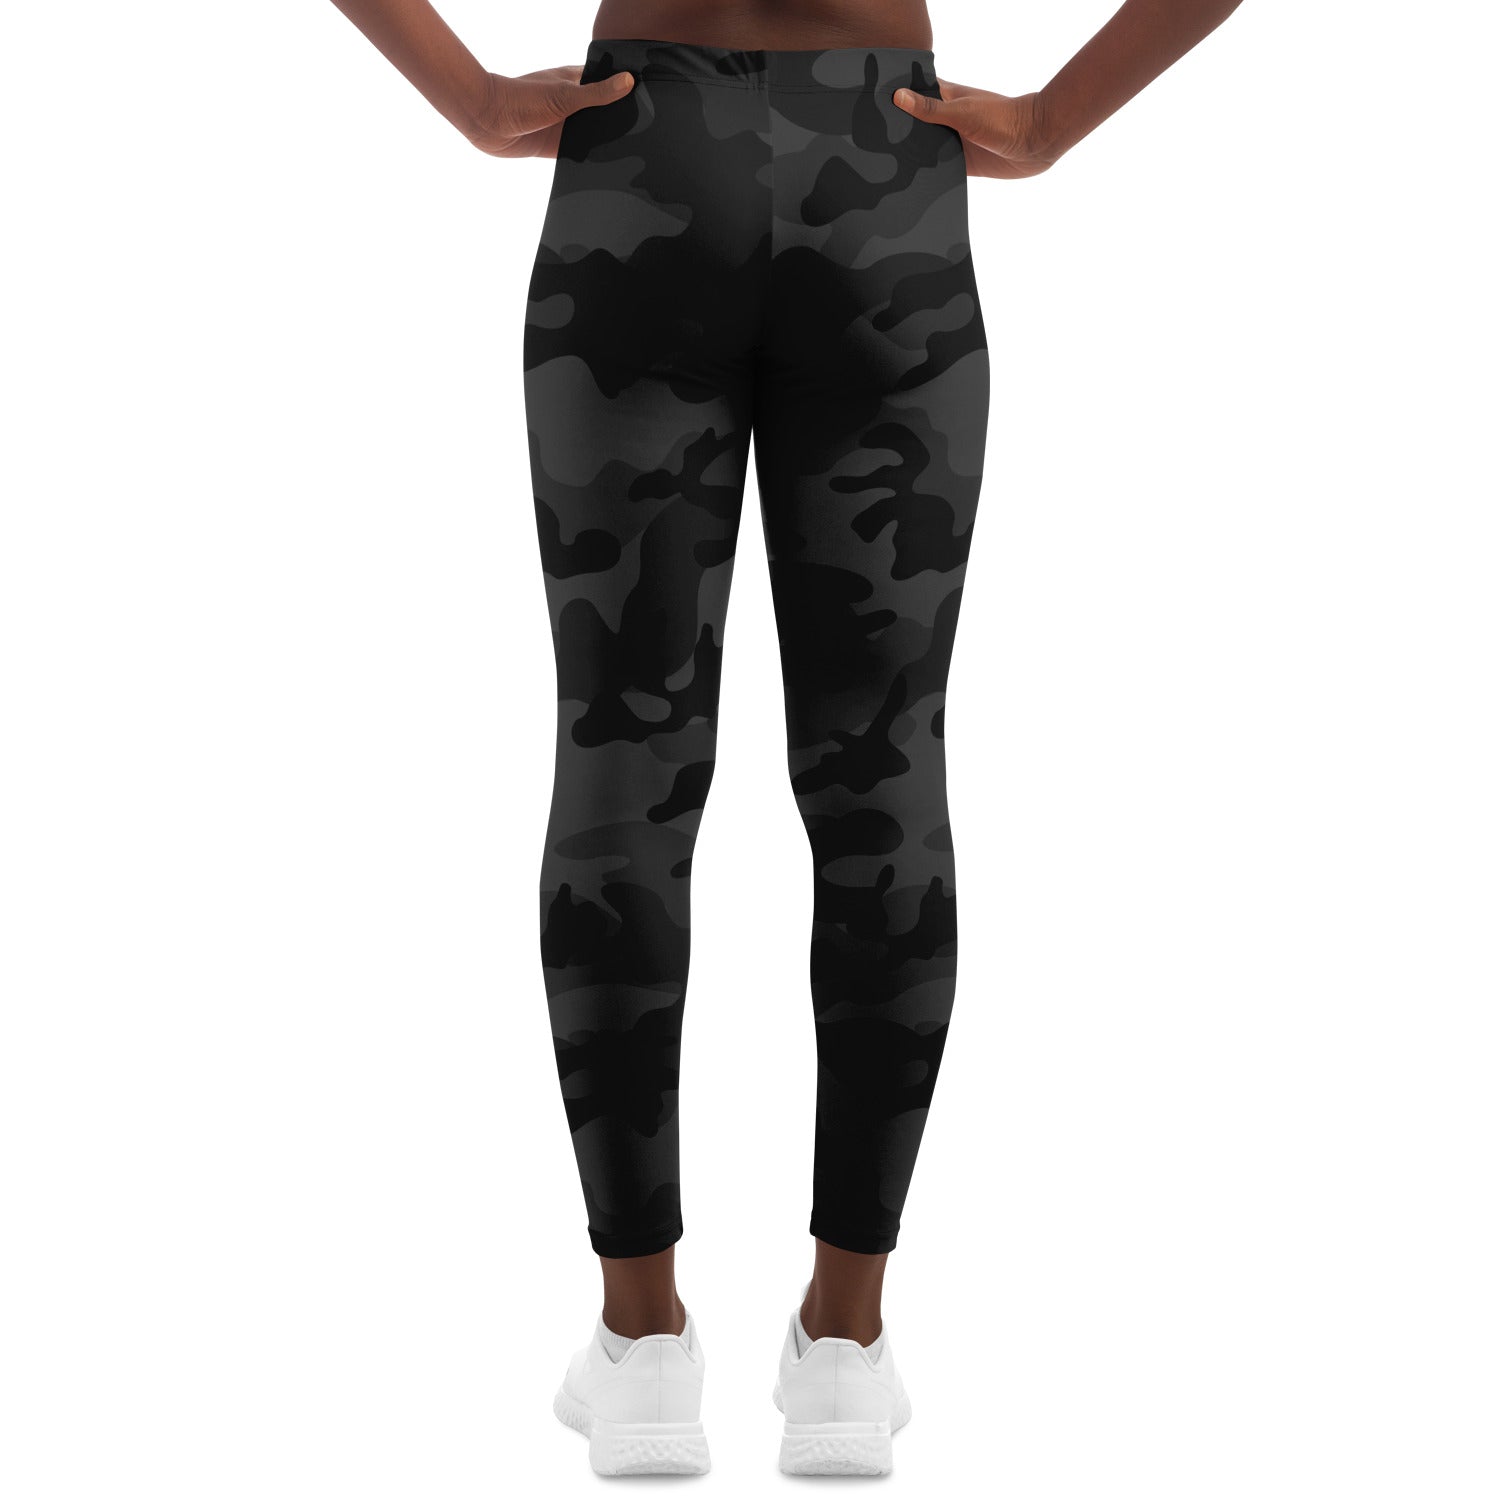 Women's All Black Camouflage Mid-rise Athletic Running Shorts